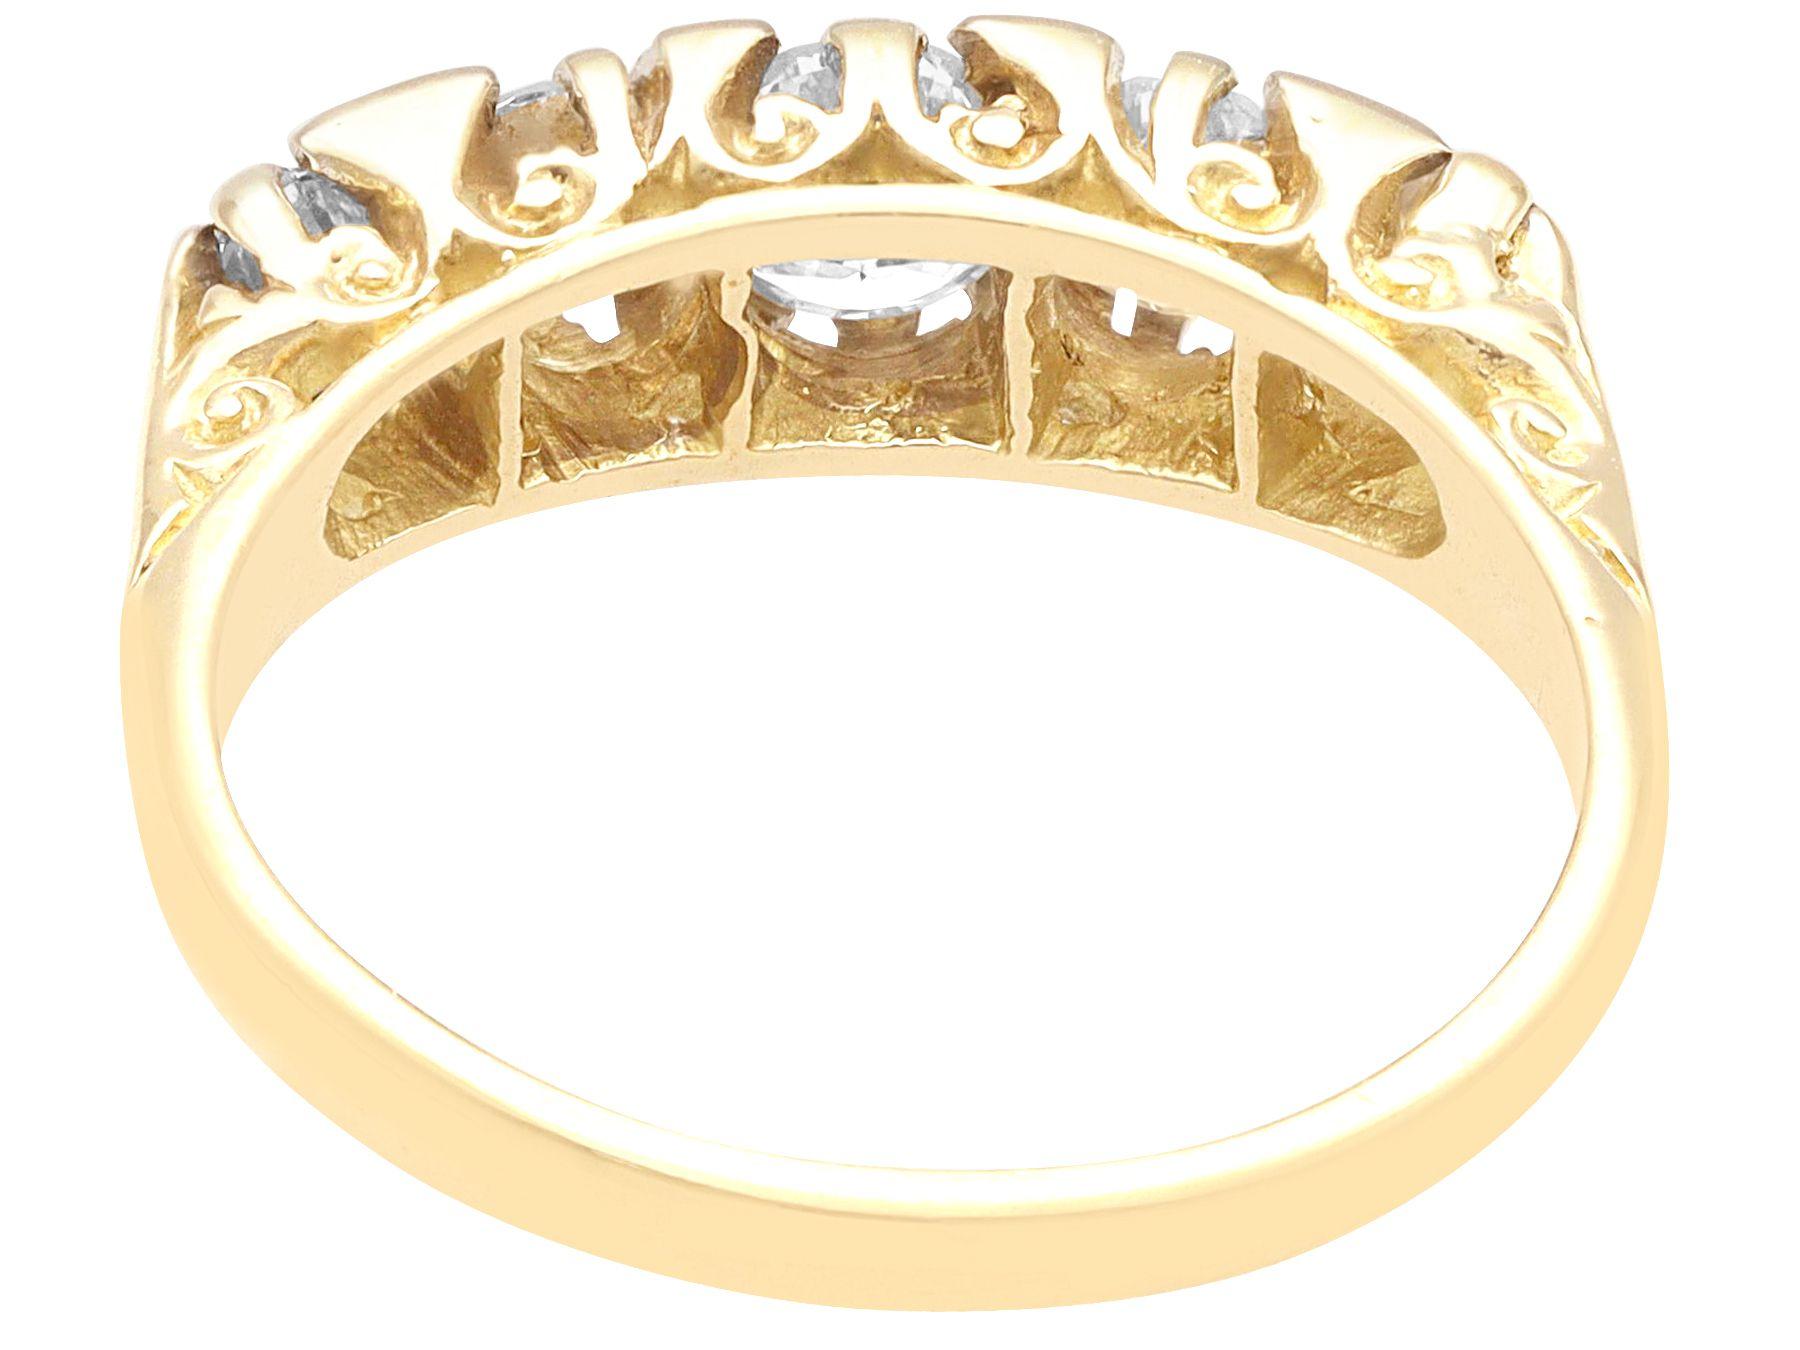 A fine and impressive vintage 1.10 carat diamond and 18 karat yellow gold five stone ring; part of our vintage estate jewelry collections.

This impressive vintage five stone diamond ring has been crafted in 18k yellow gold.

The pierced decorated,